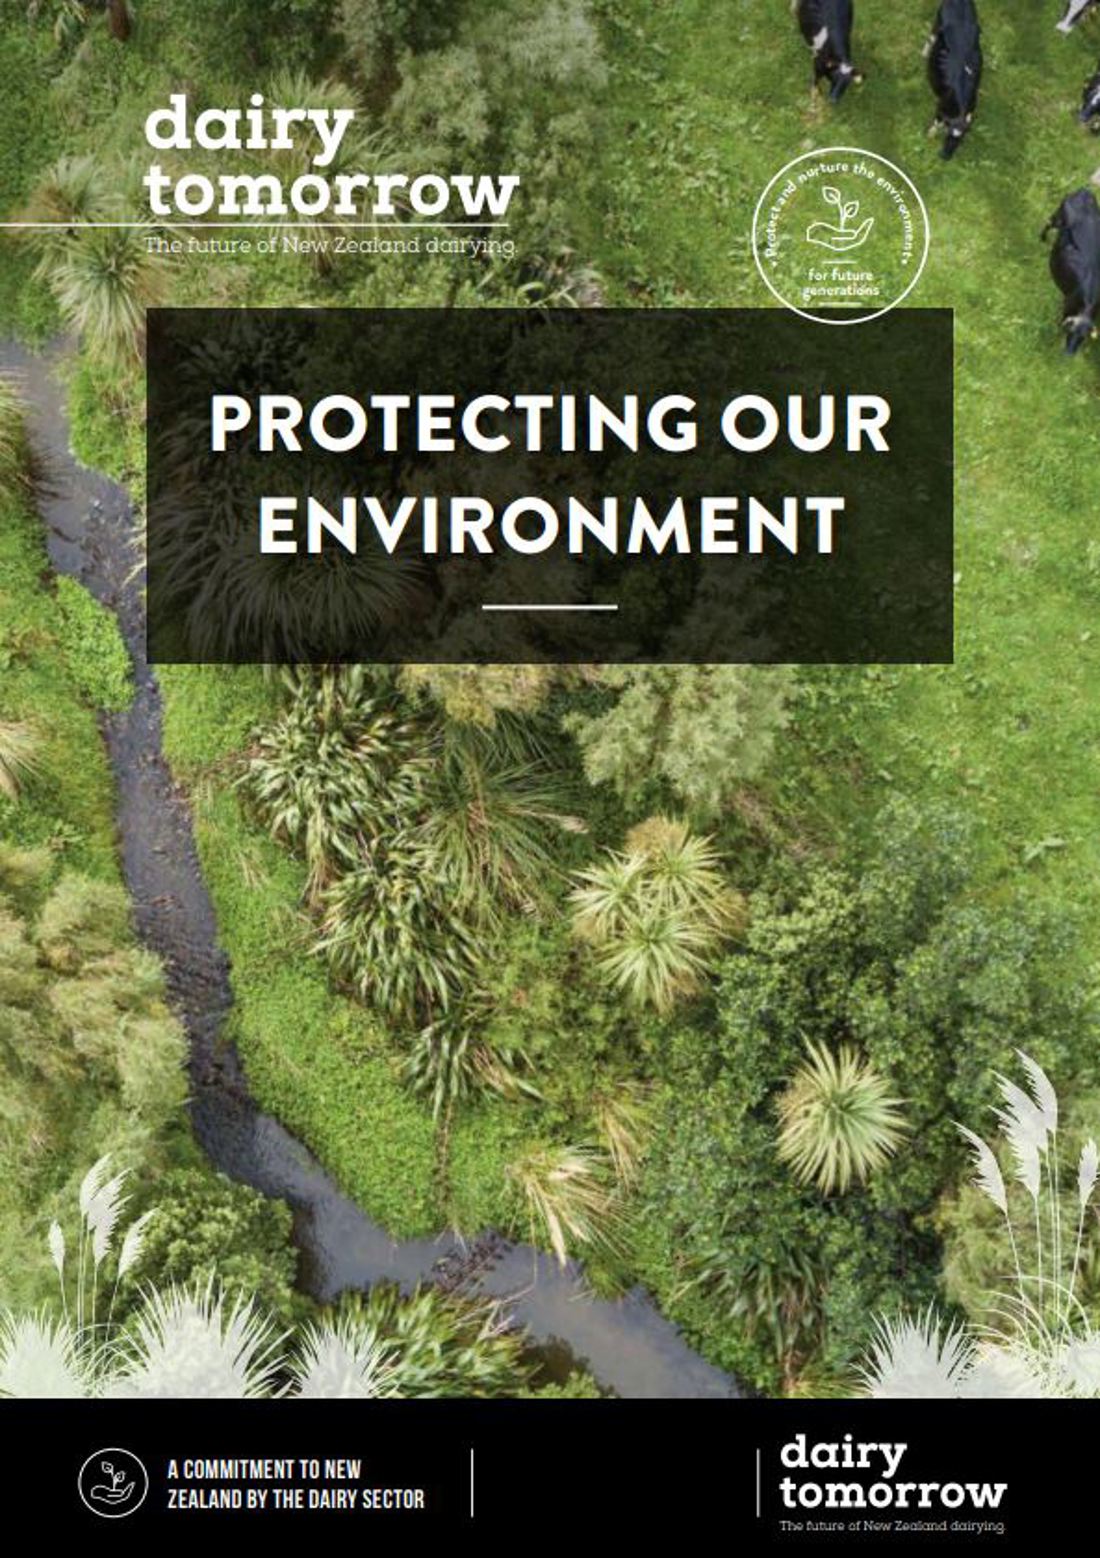 Sustainable Dairying Annual Report Dairy Tomorrow Protecting Our Environment Image